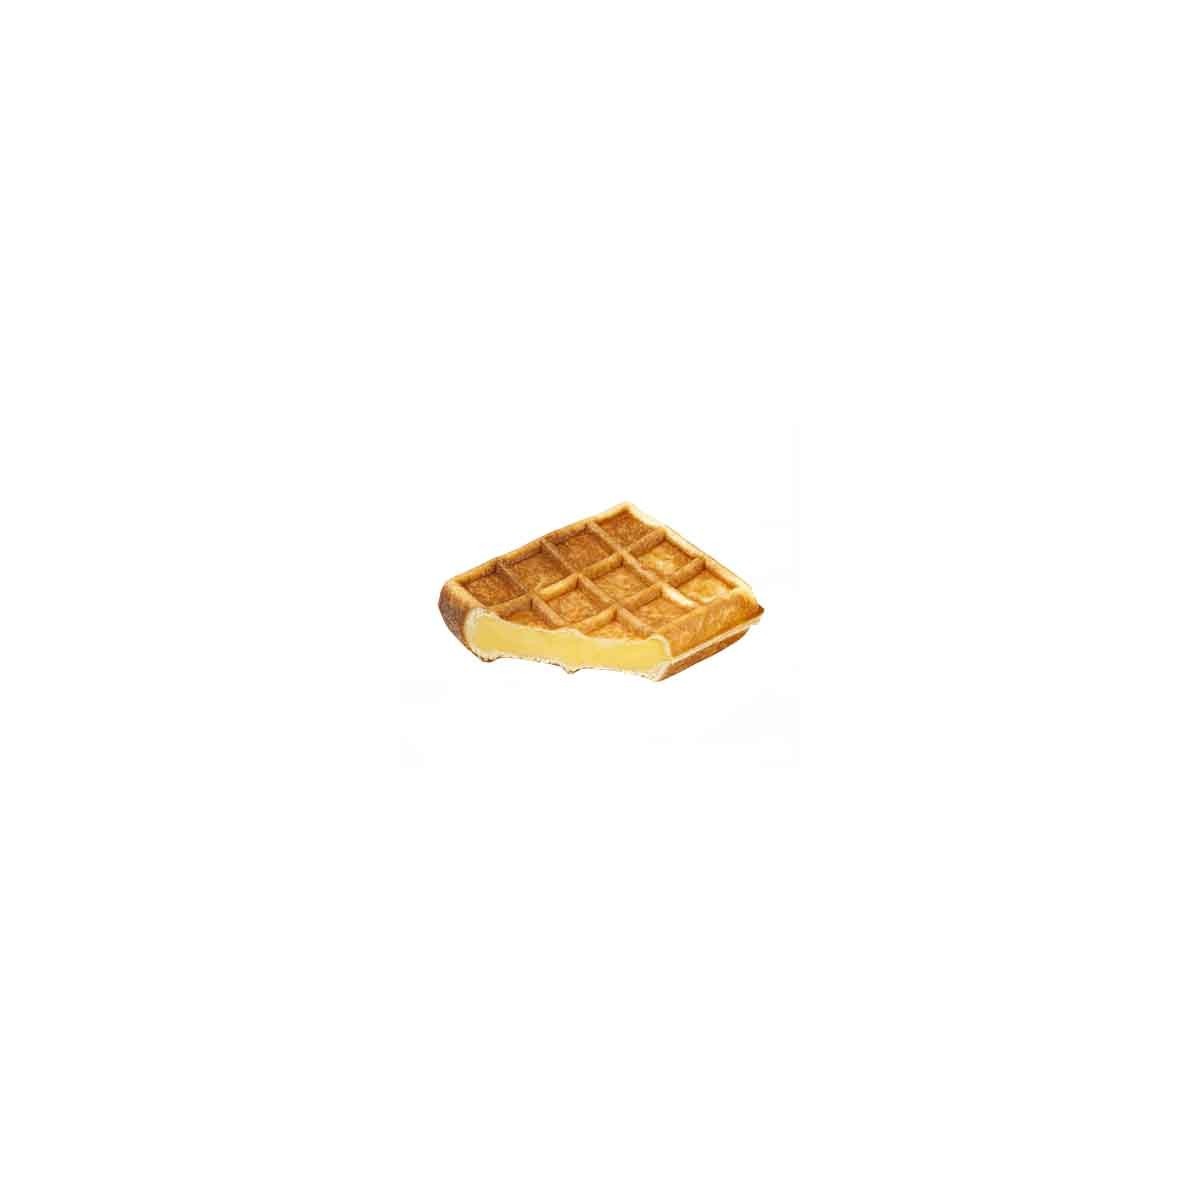 VAMIX A224 MINI WAFFLE WITH PASTRY CREAM 8X7CM BAKED 48X80GR  BOX